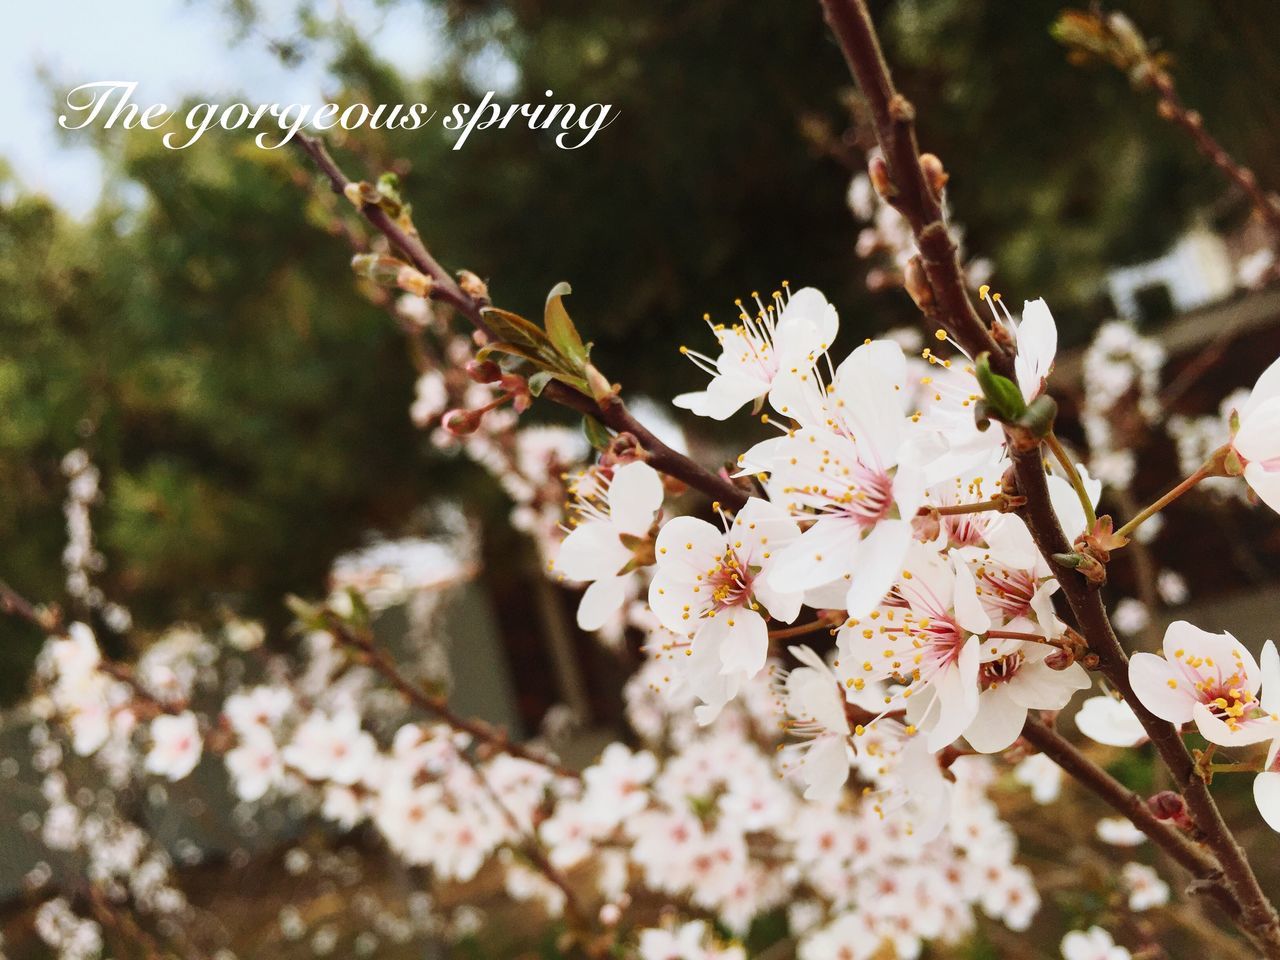 flower, growth, branch, freshness, tree, fragility, nature, close-up, beauty in nature, focus on foreground, cherry blossom, blossom, white color, low angle view, twig, cherry tree, springtime, plant, blooming, leaf